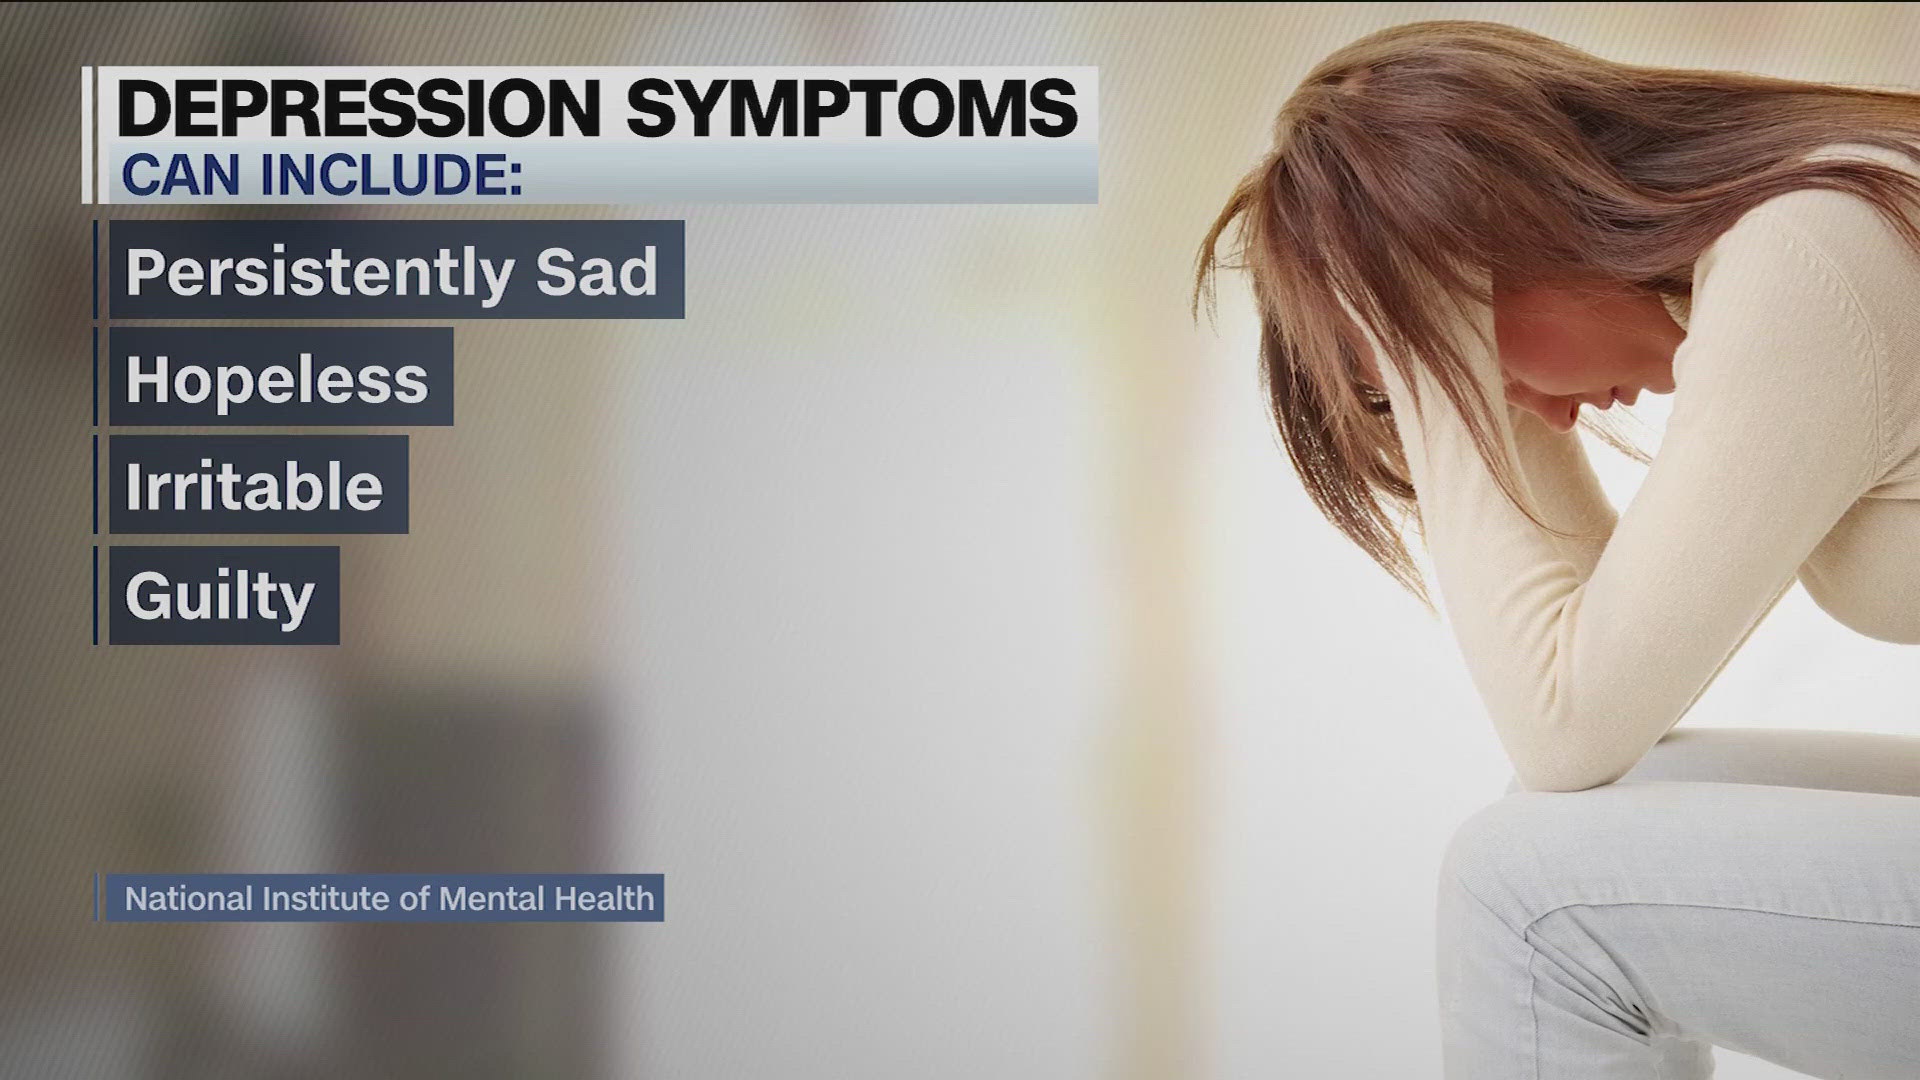 Experts say knowing the signs and getting a diagnosis opens up treatment options that can help manage symptoms.